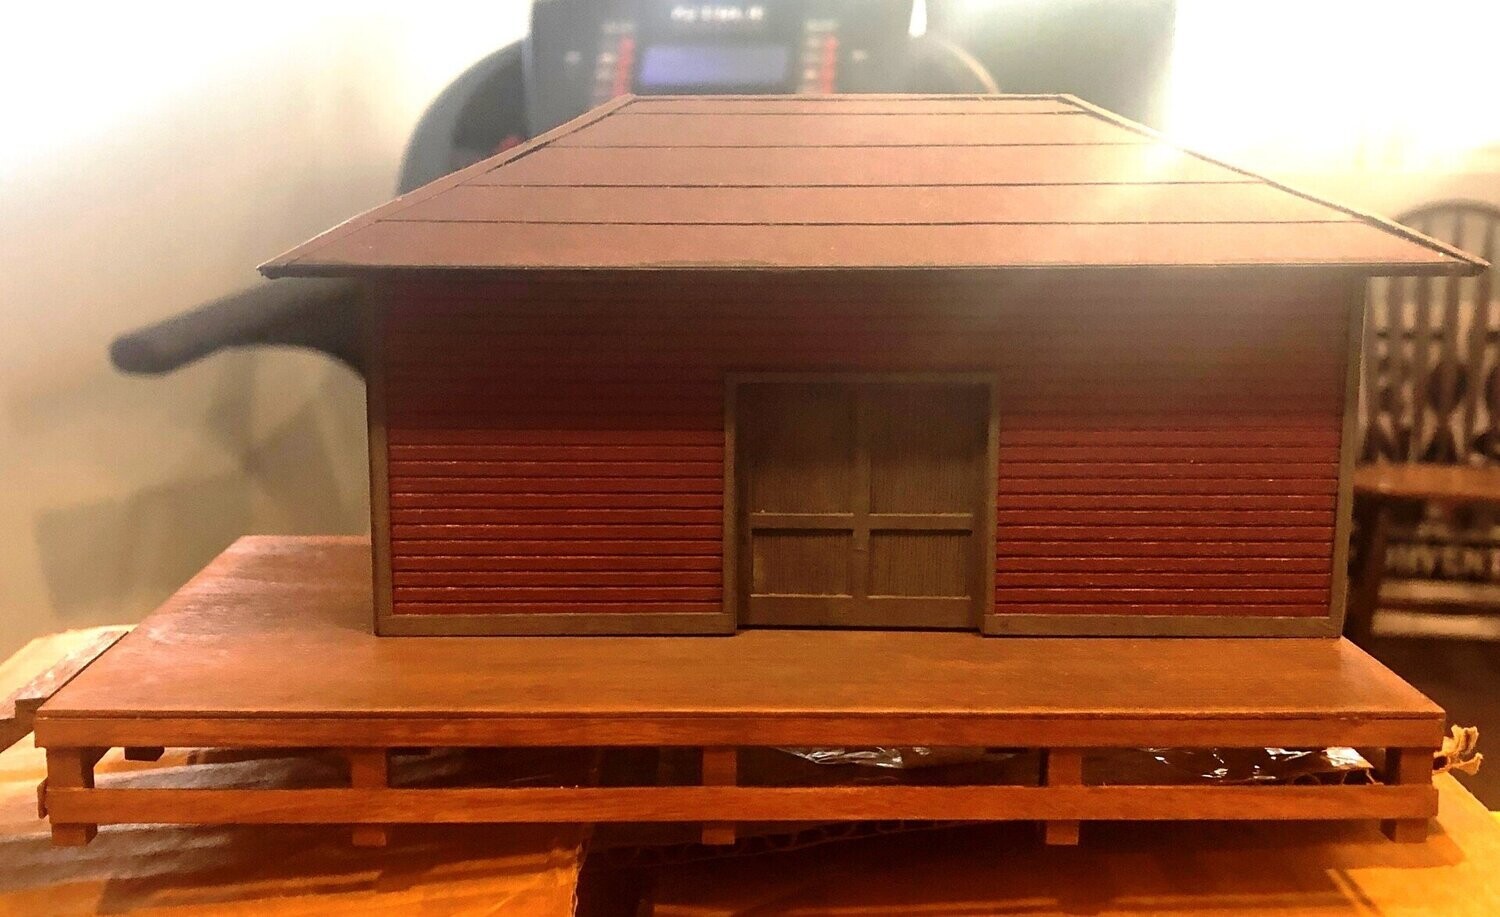 FREIGHT HOUSE KIT (NASG 2018 Convention kit)